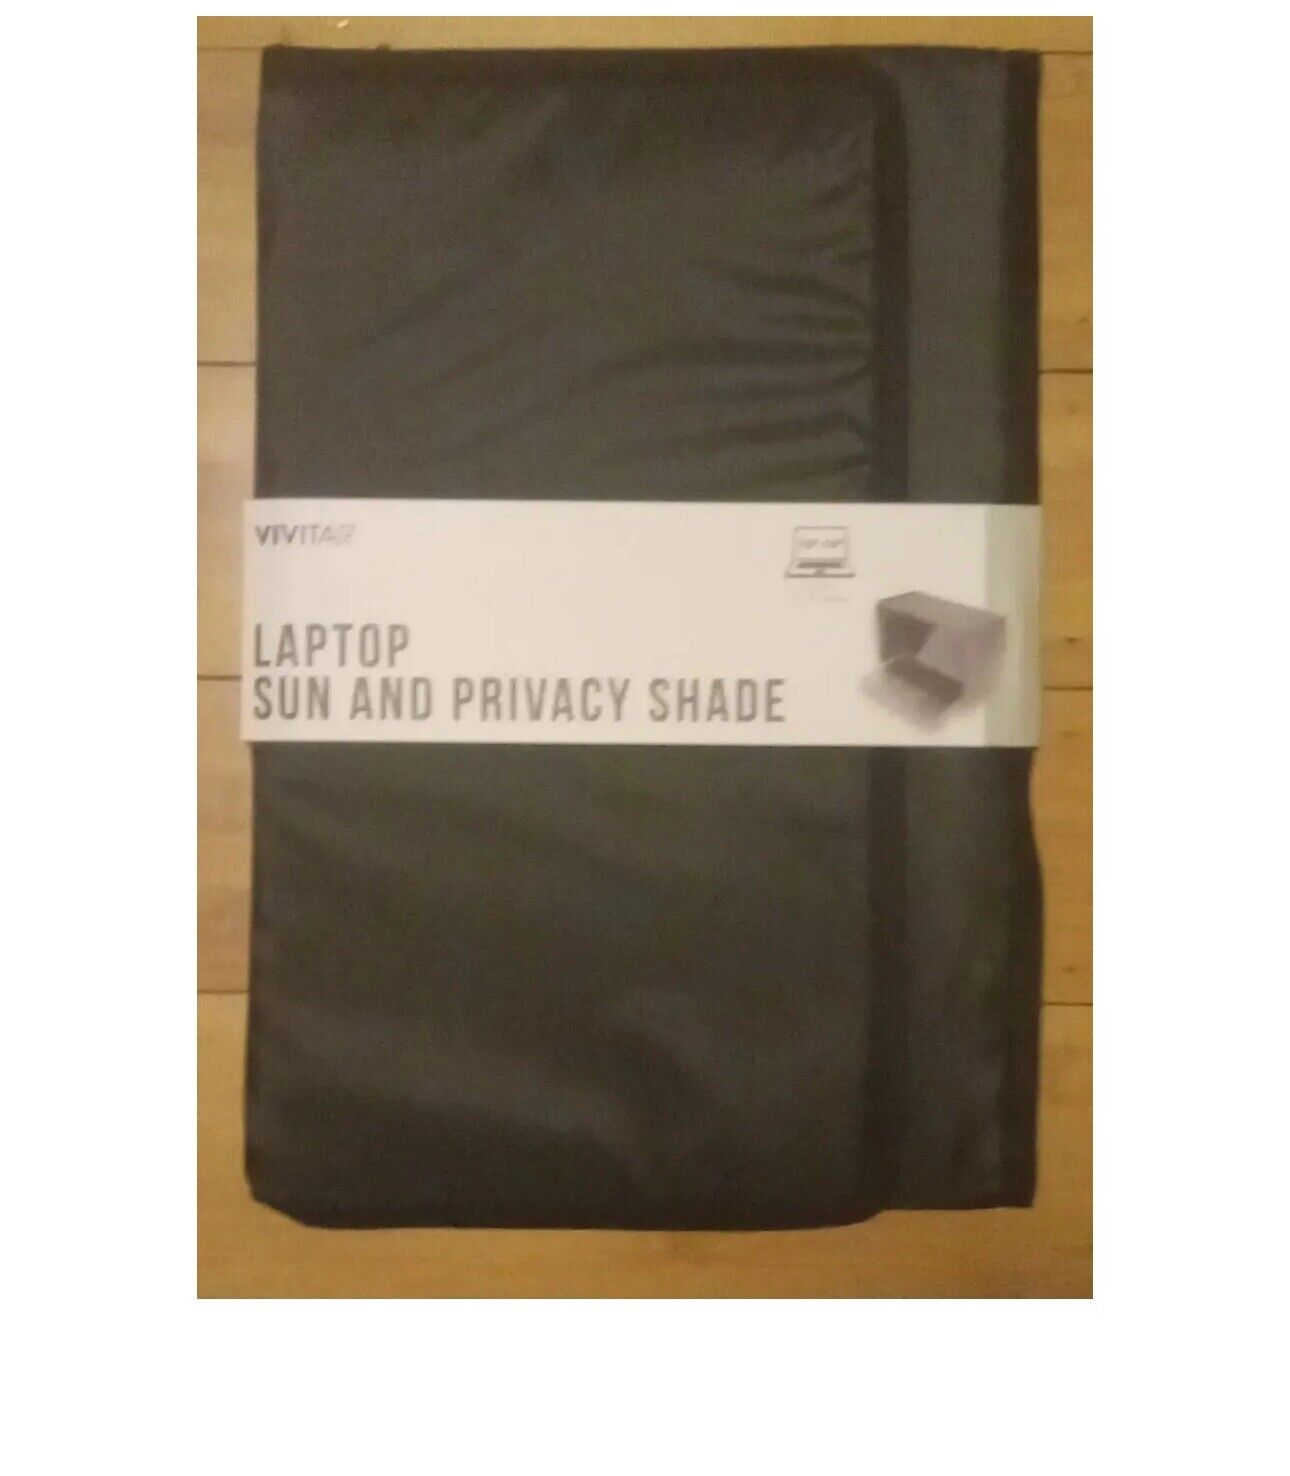 Vivitar Laptop Sun & Privacy Shade Fits up to 15